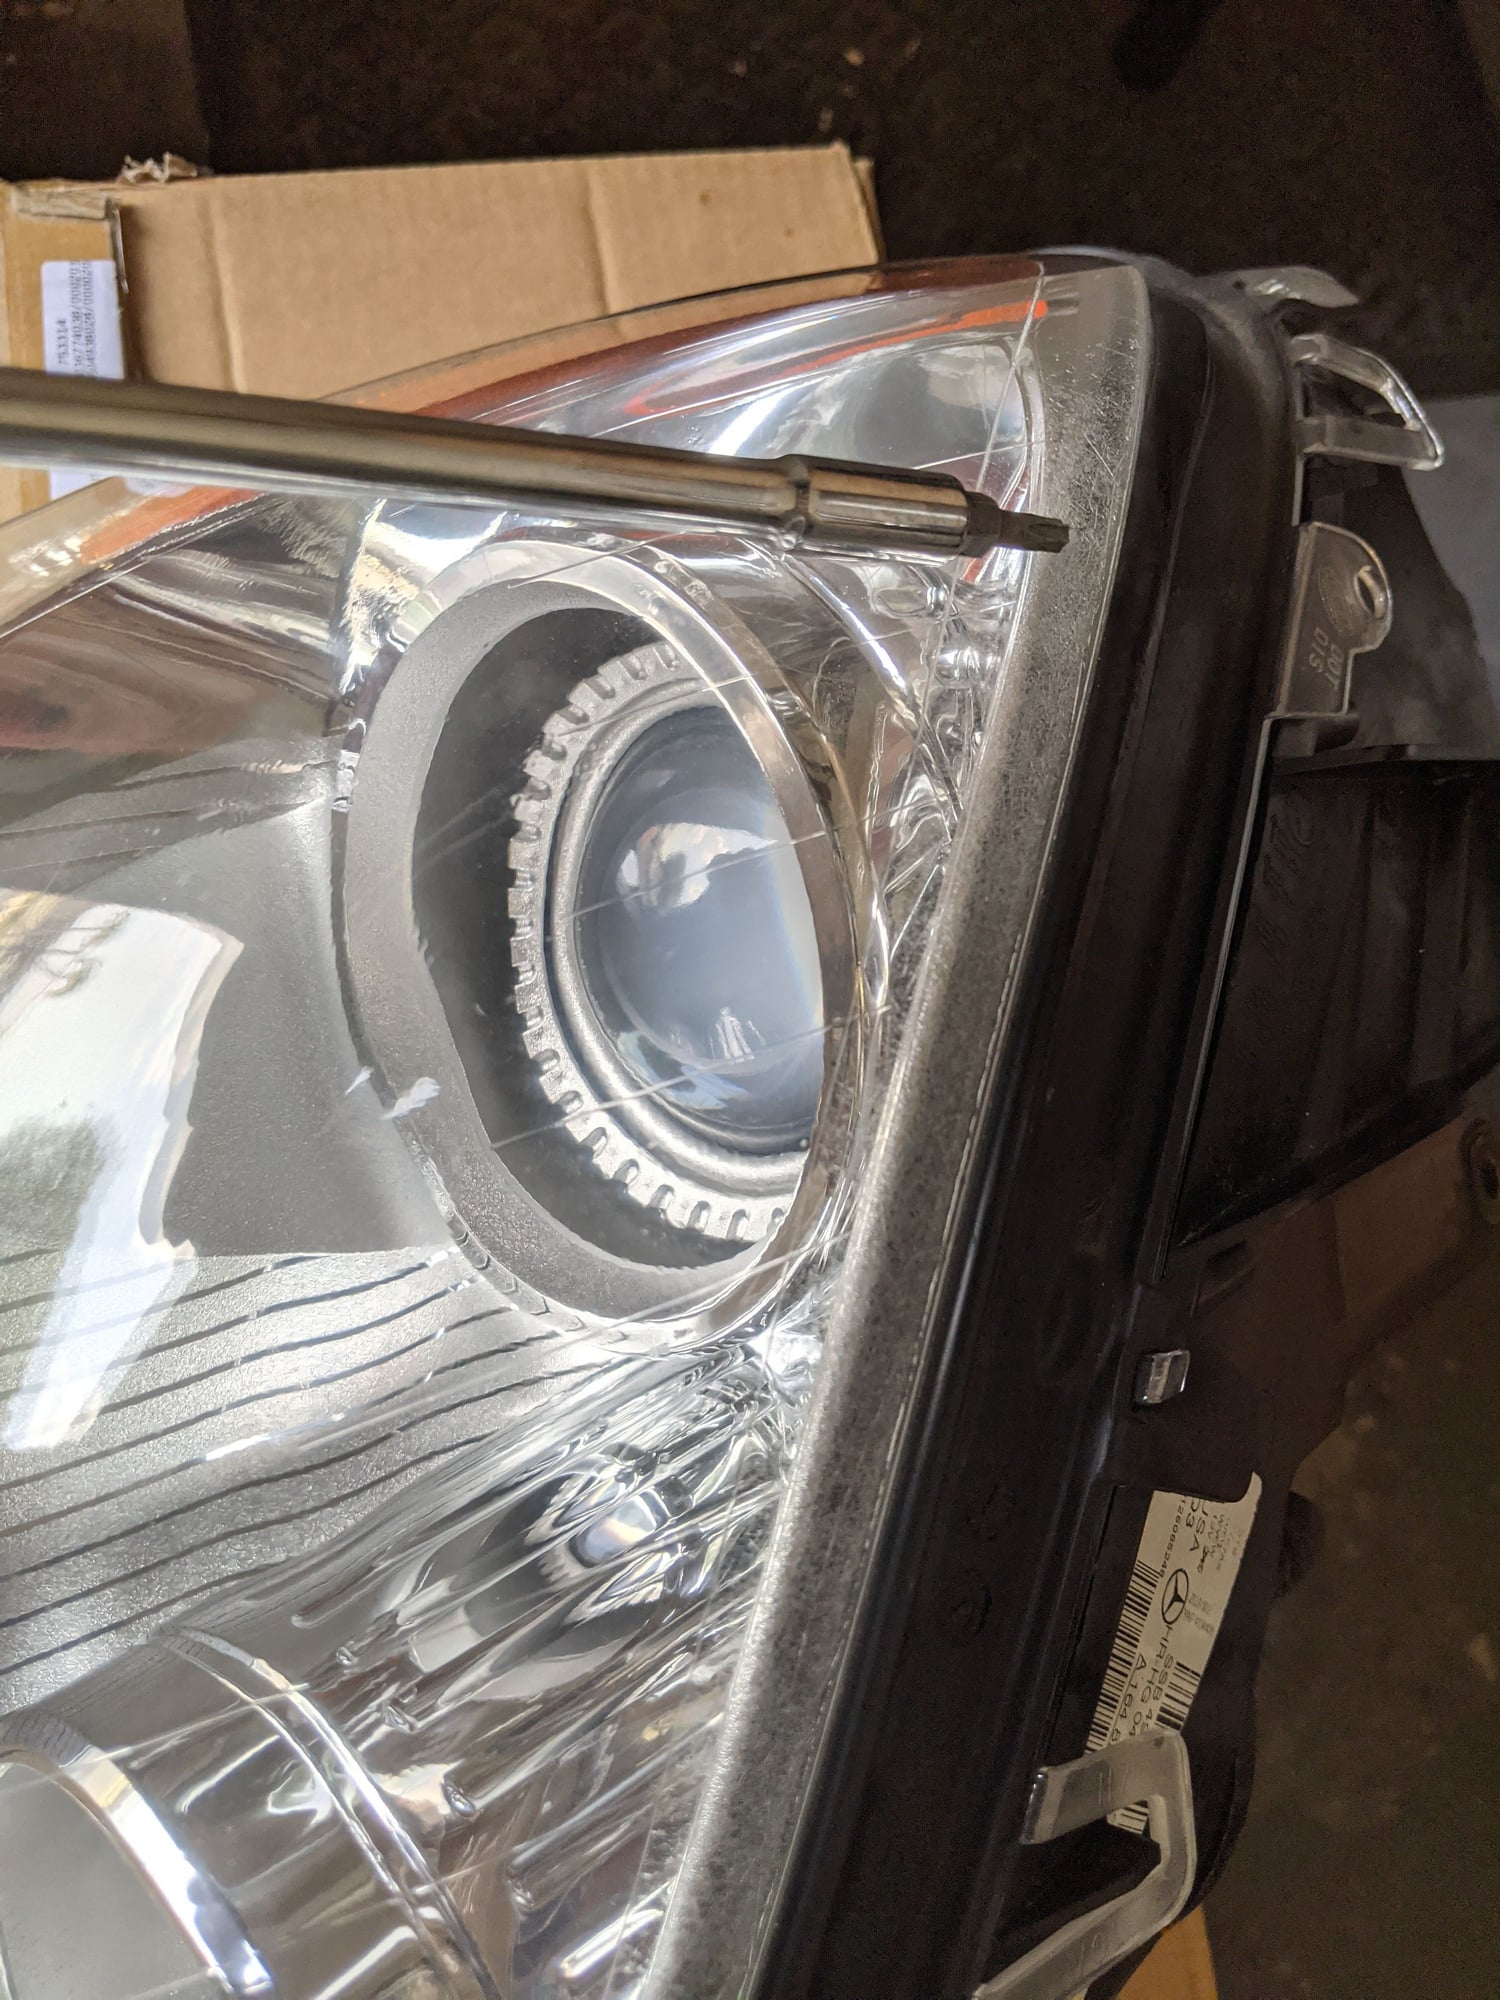 Lights - W164 Bi-Xenon headlights; complete set - Fantastic condition. - Used - 2009 to 2011 Mercedes-Benz ML63 AMG - Fort Myers, FL 33913, United States